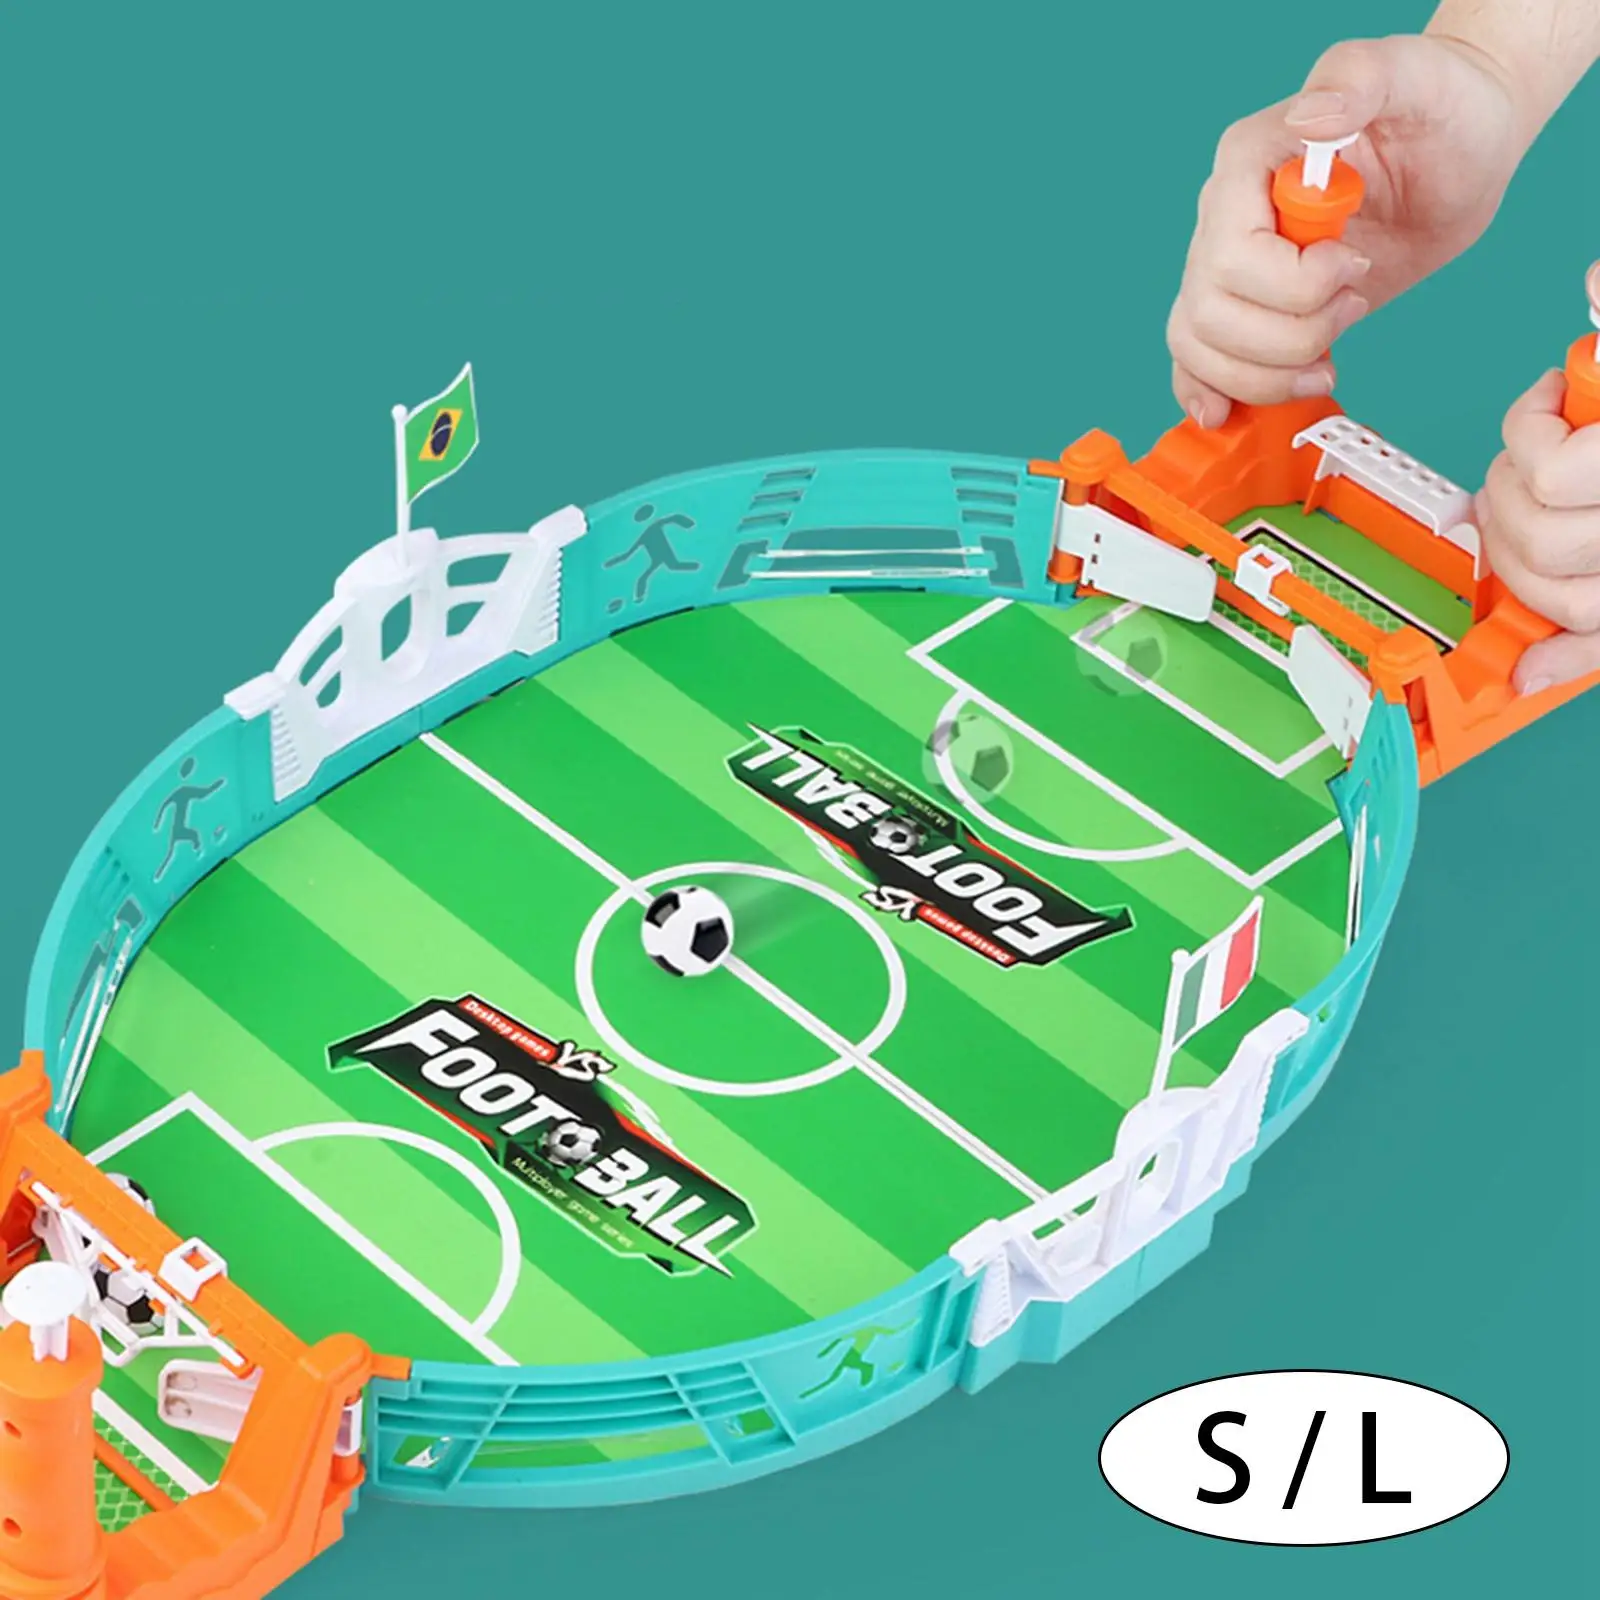  Top Football Game, Family Game Competitive Soccer Games for Children Kids Birthday Gifts